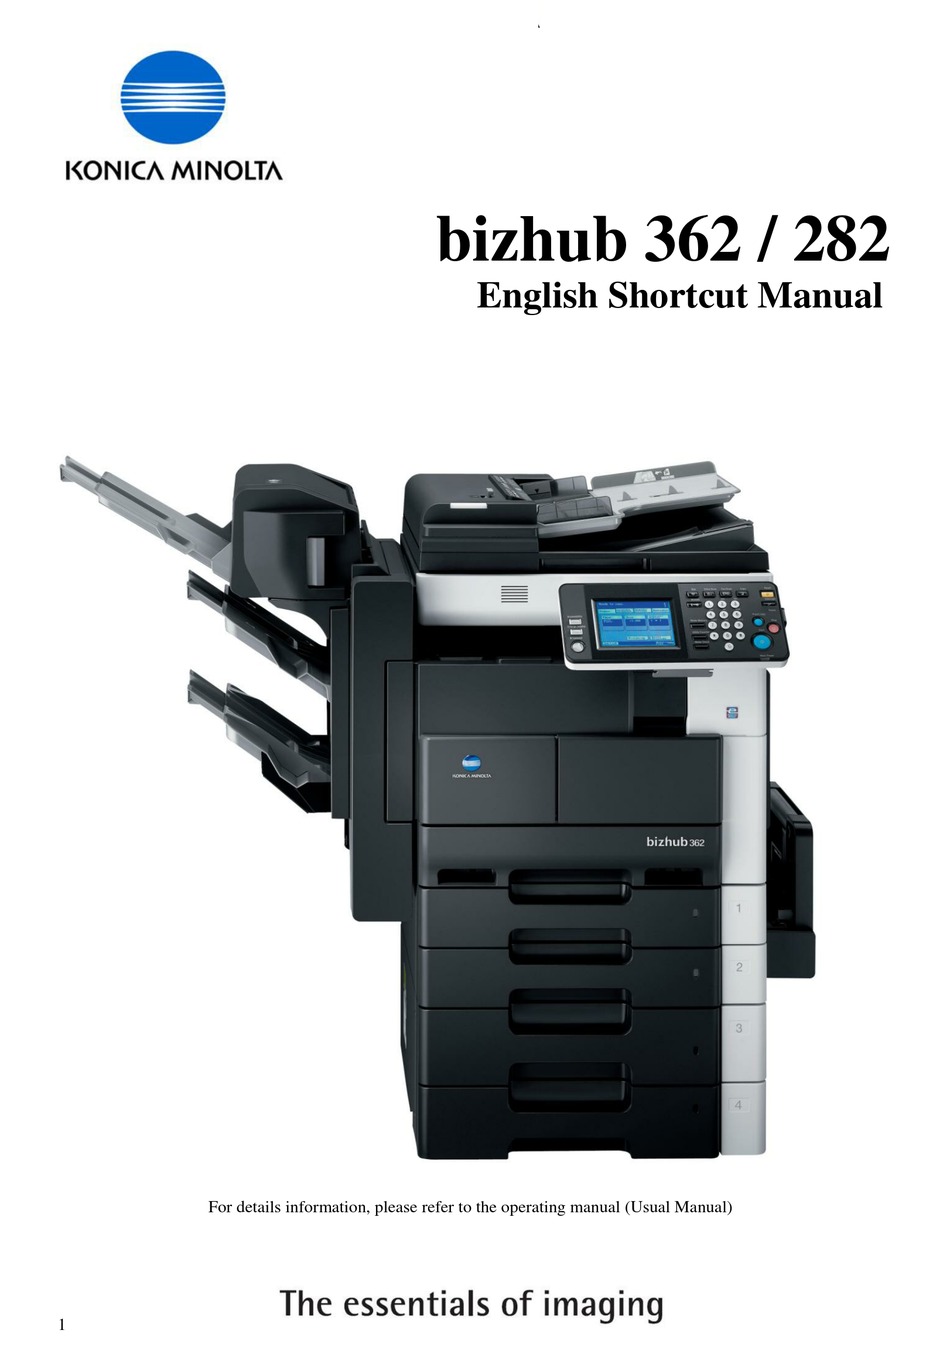 Bizhub 362 Scan Driver : Bizhub becomes the information hub of your business, allowing users to ...